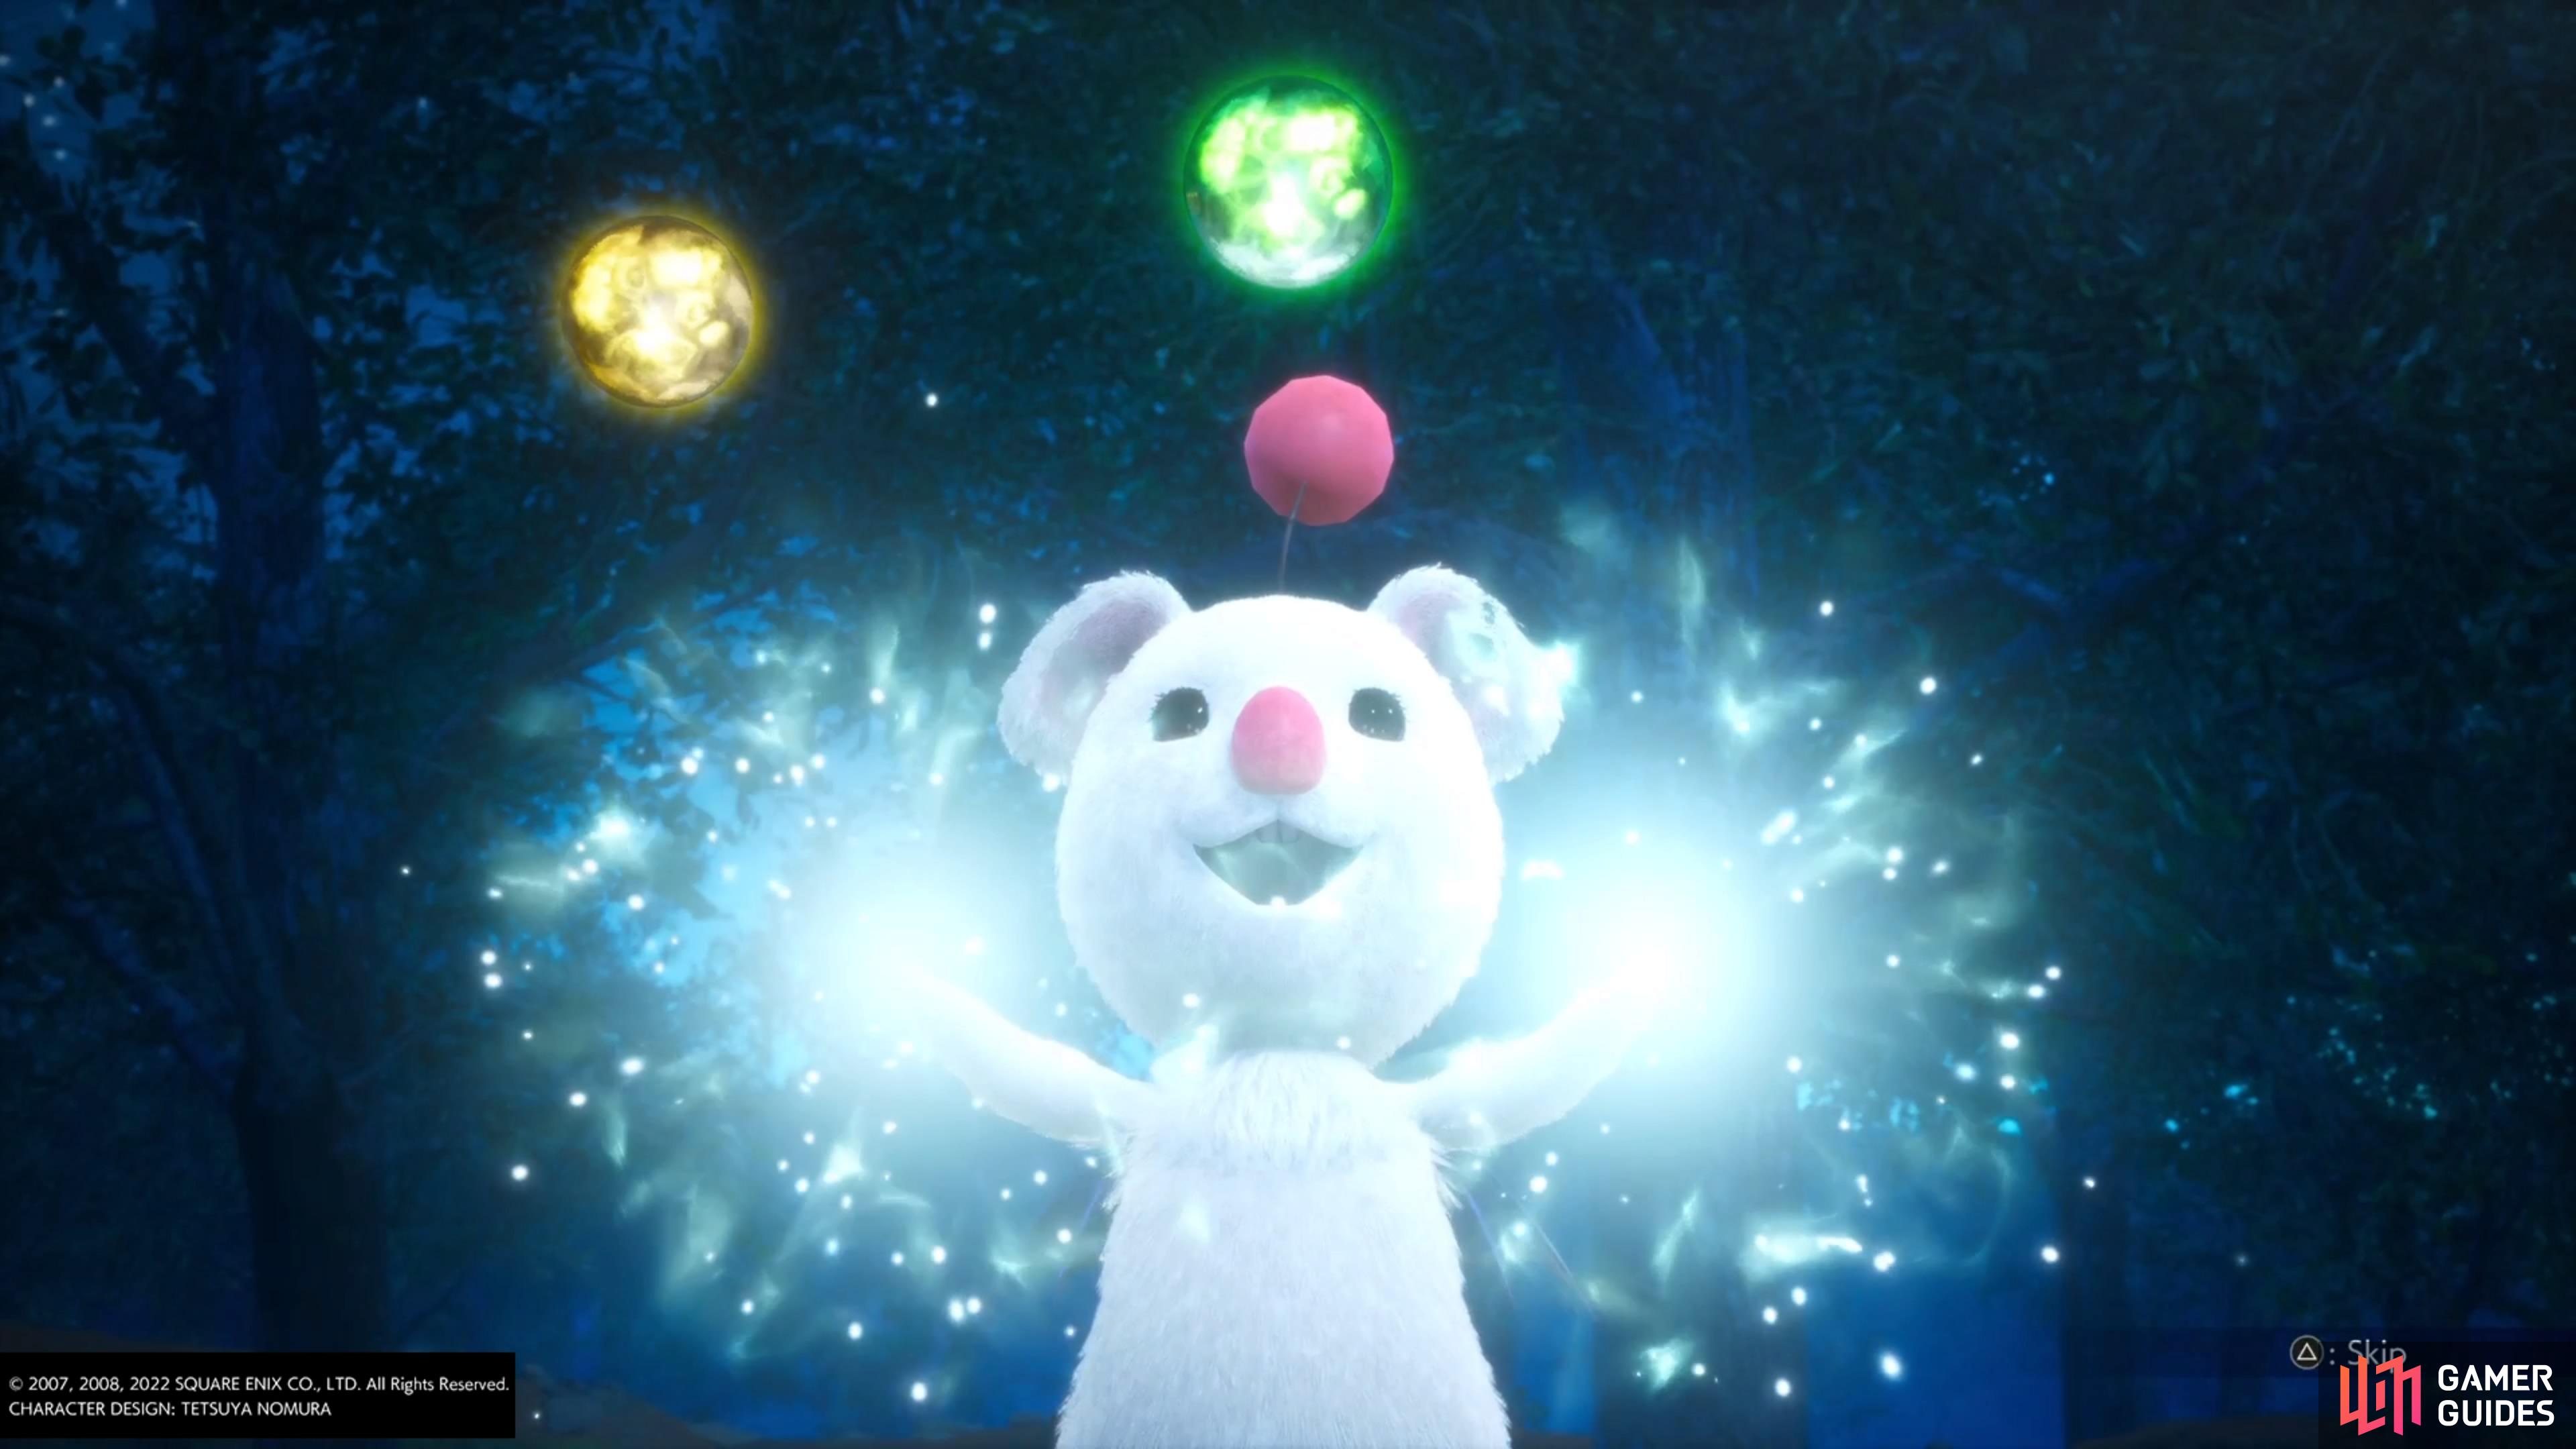 The Moogle Summon can help you level up your Materia